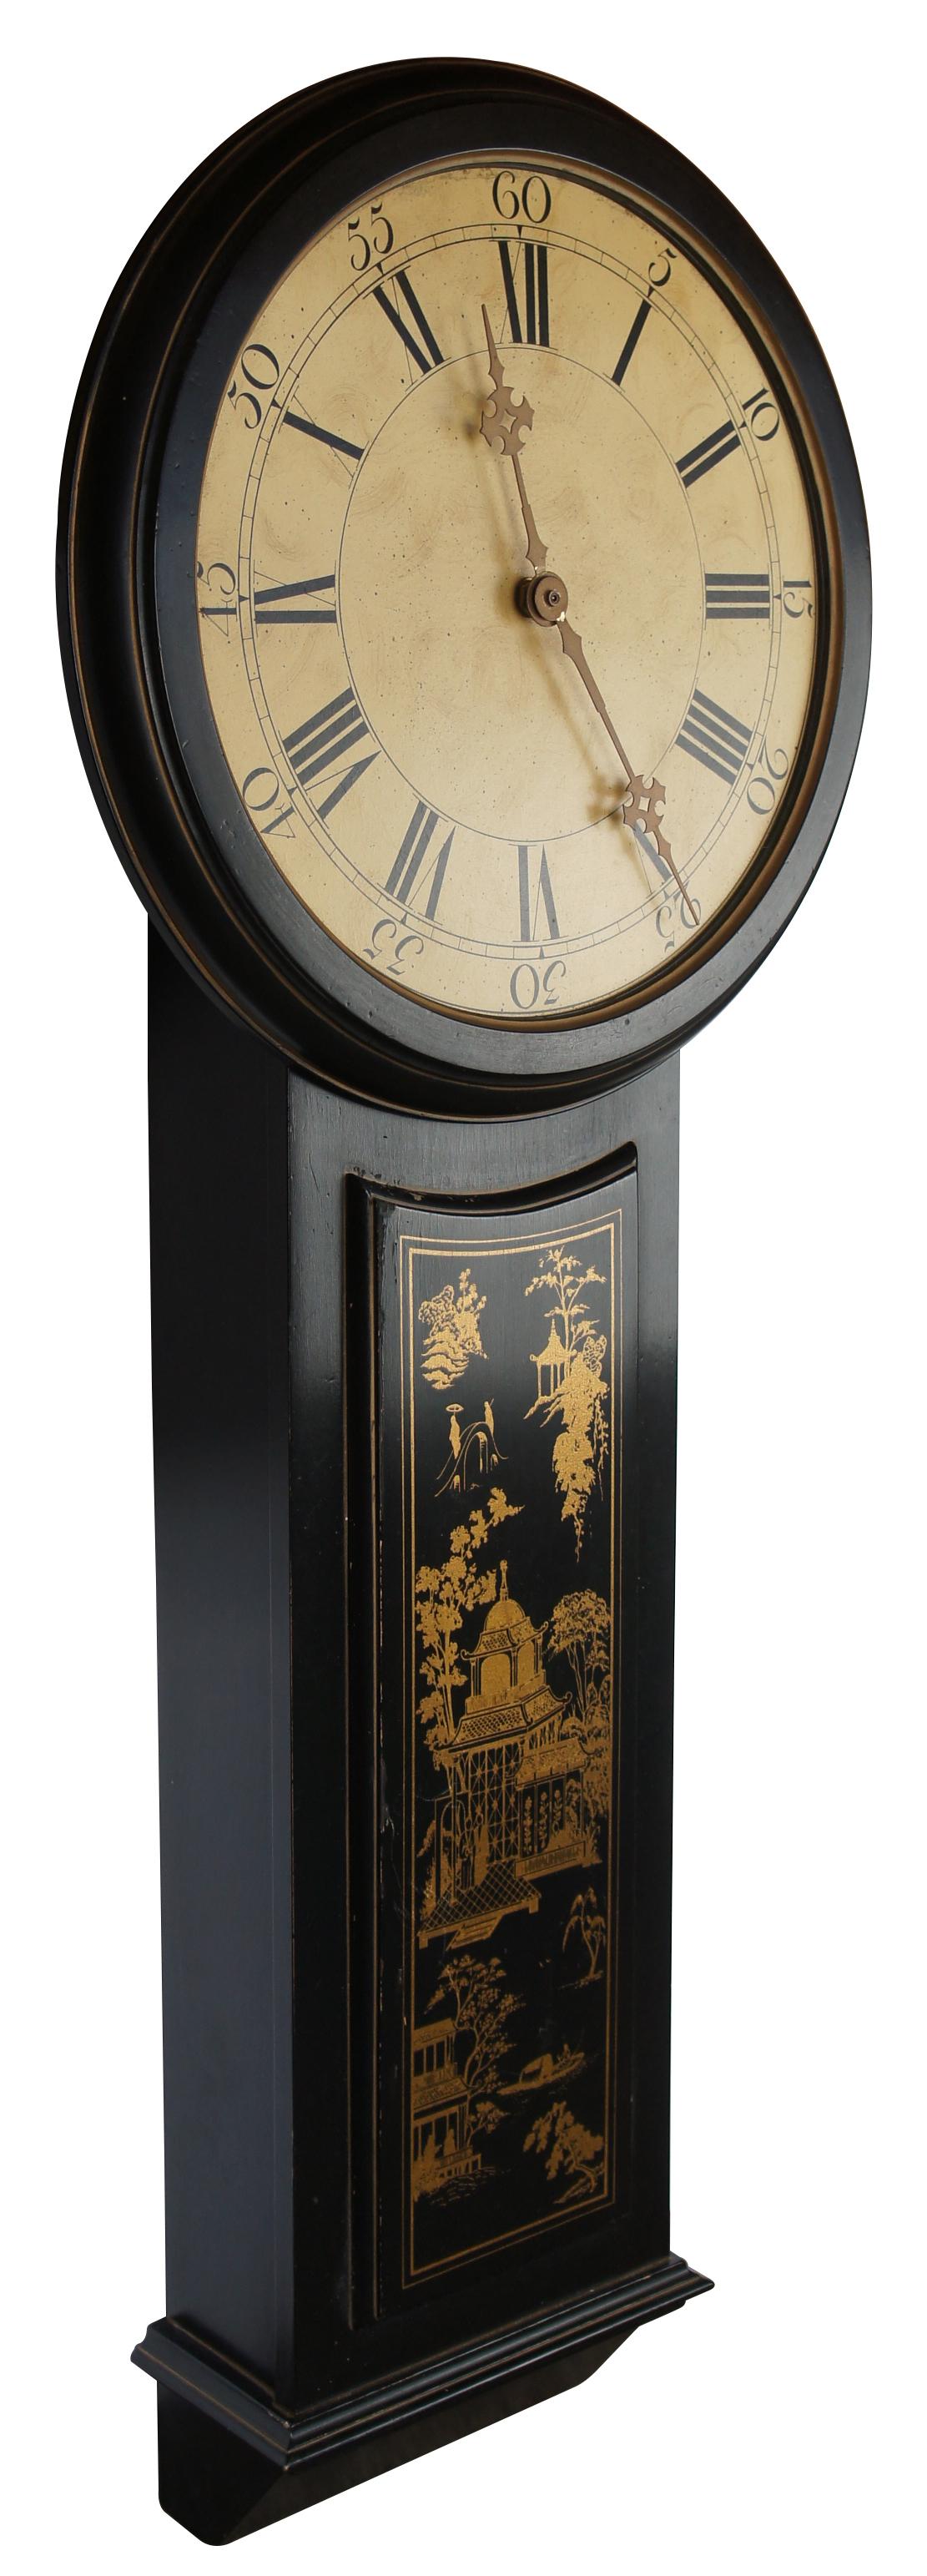 act of parliament clock for sale